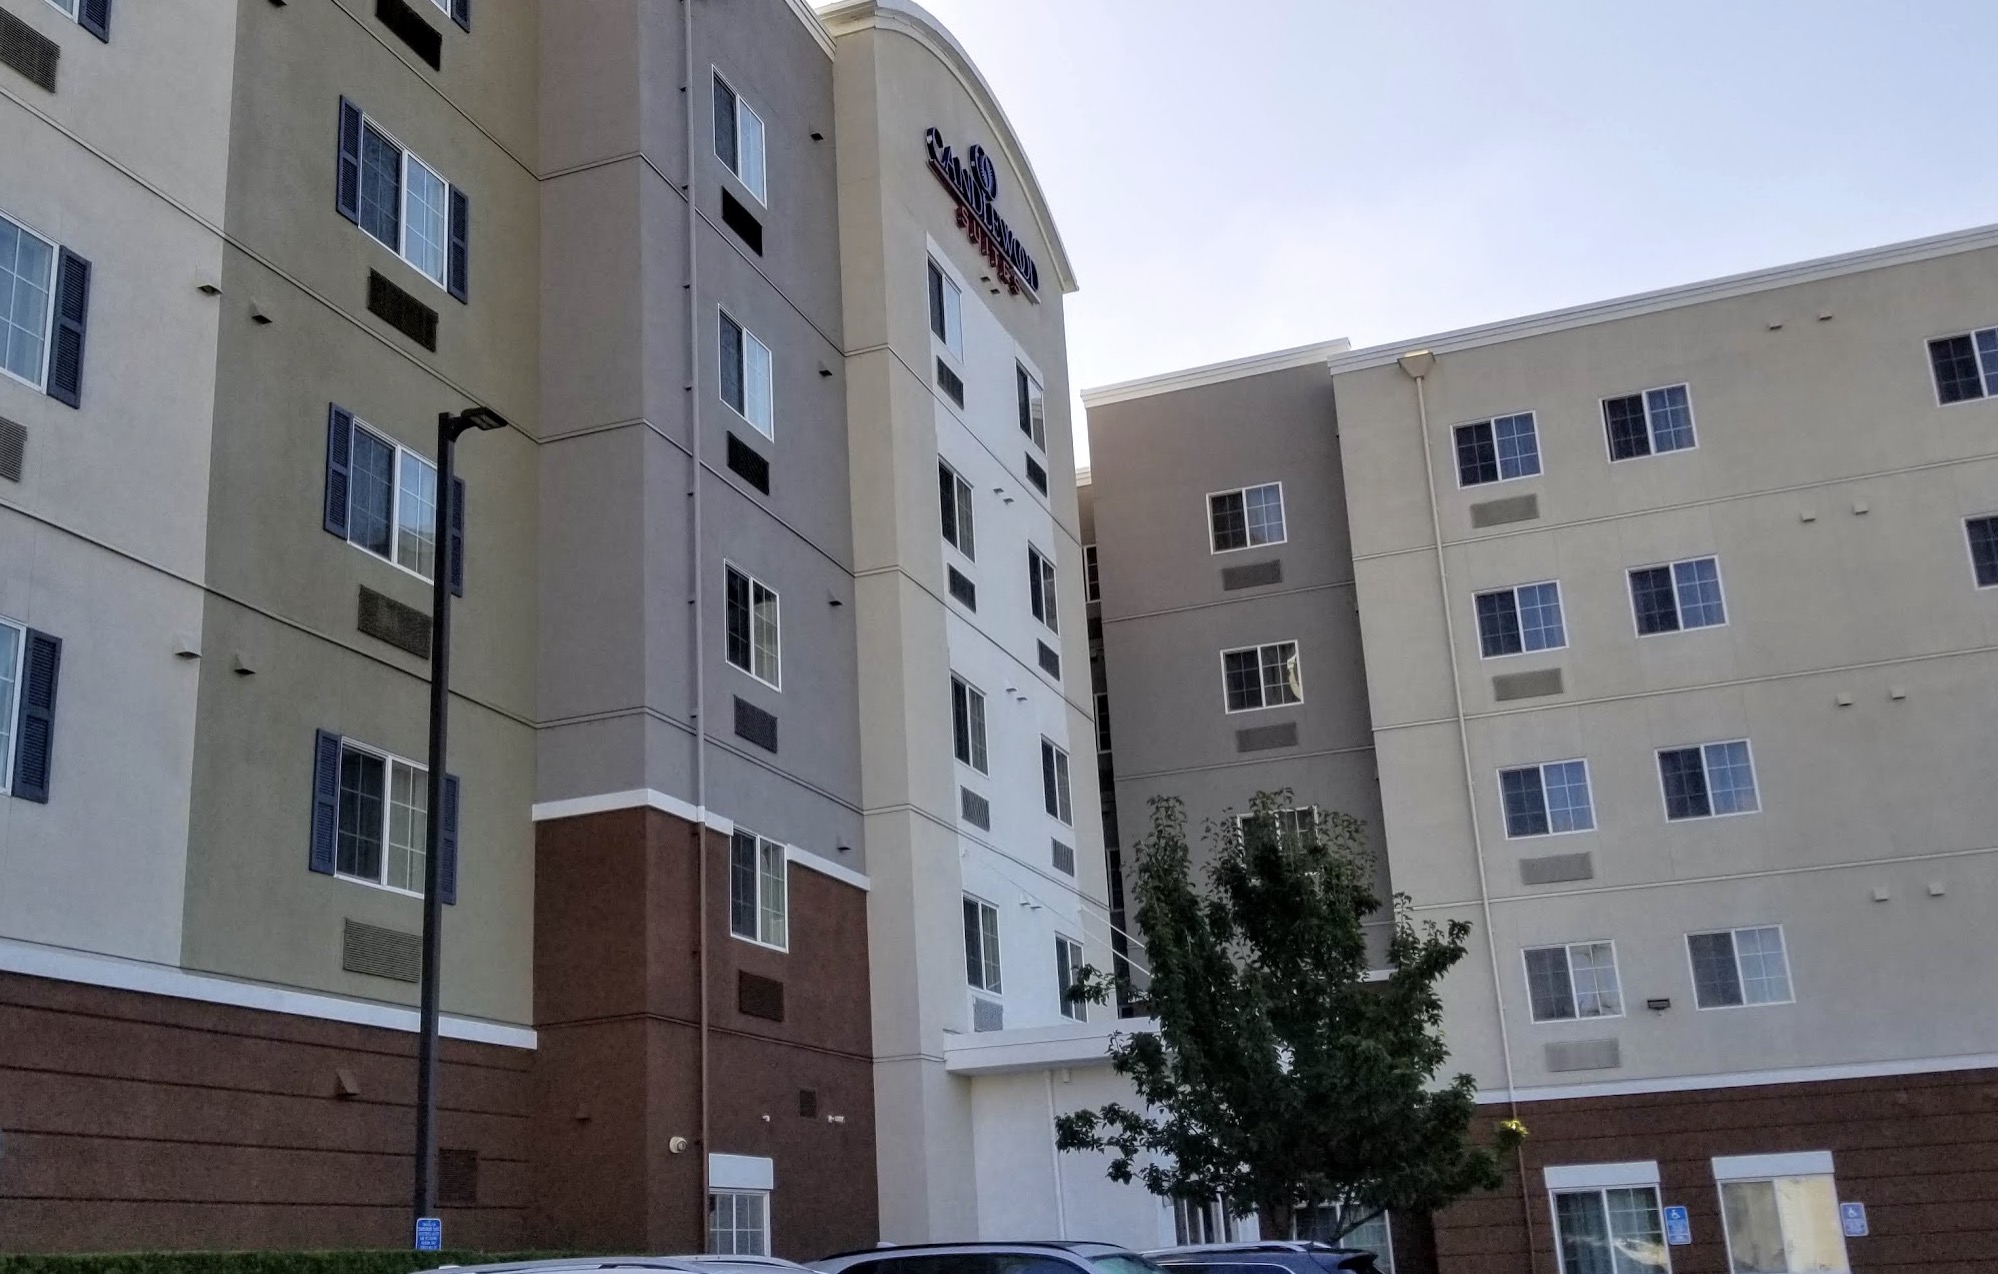 Candlewood Suites Portland Airport Pdx Exterior 2 